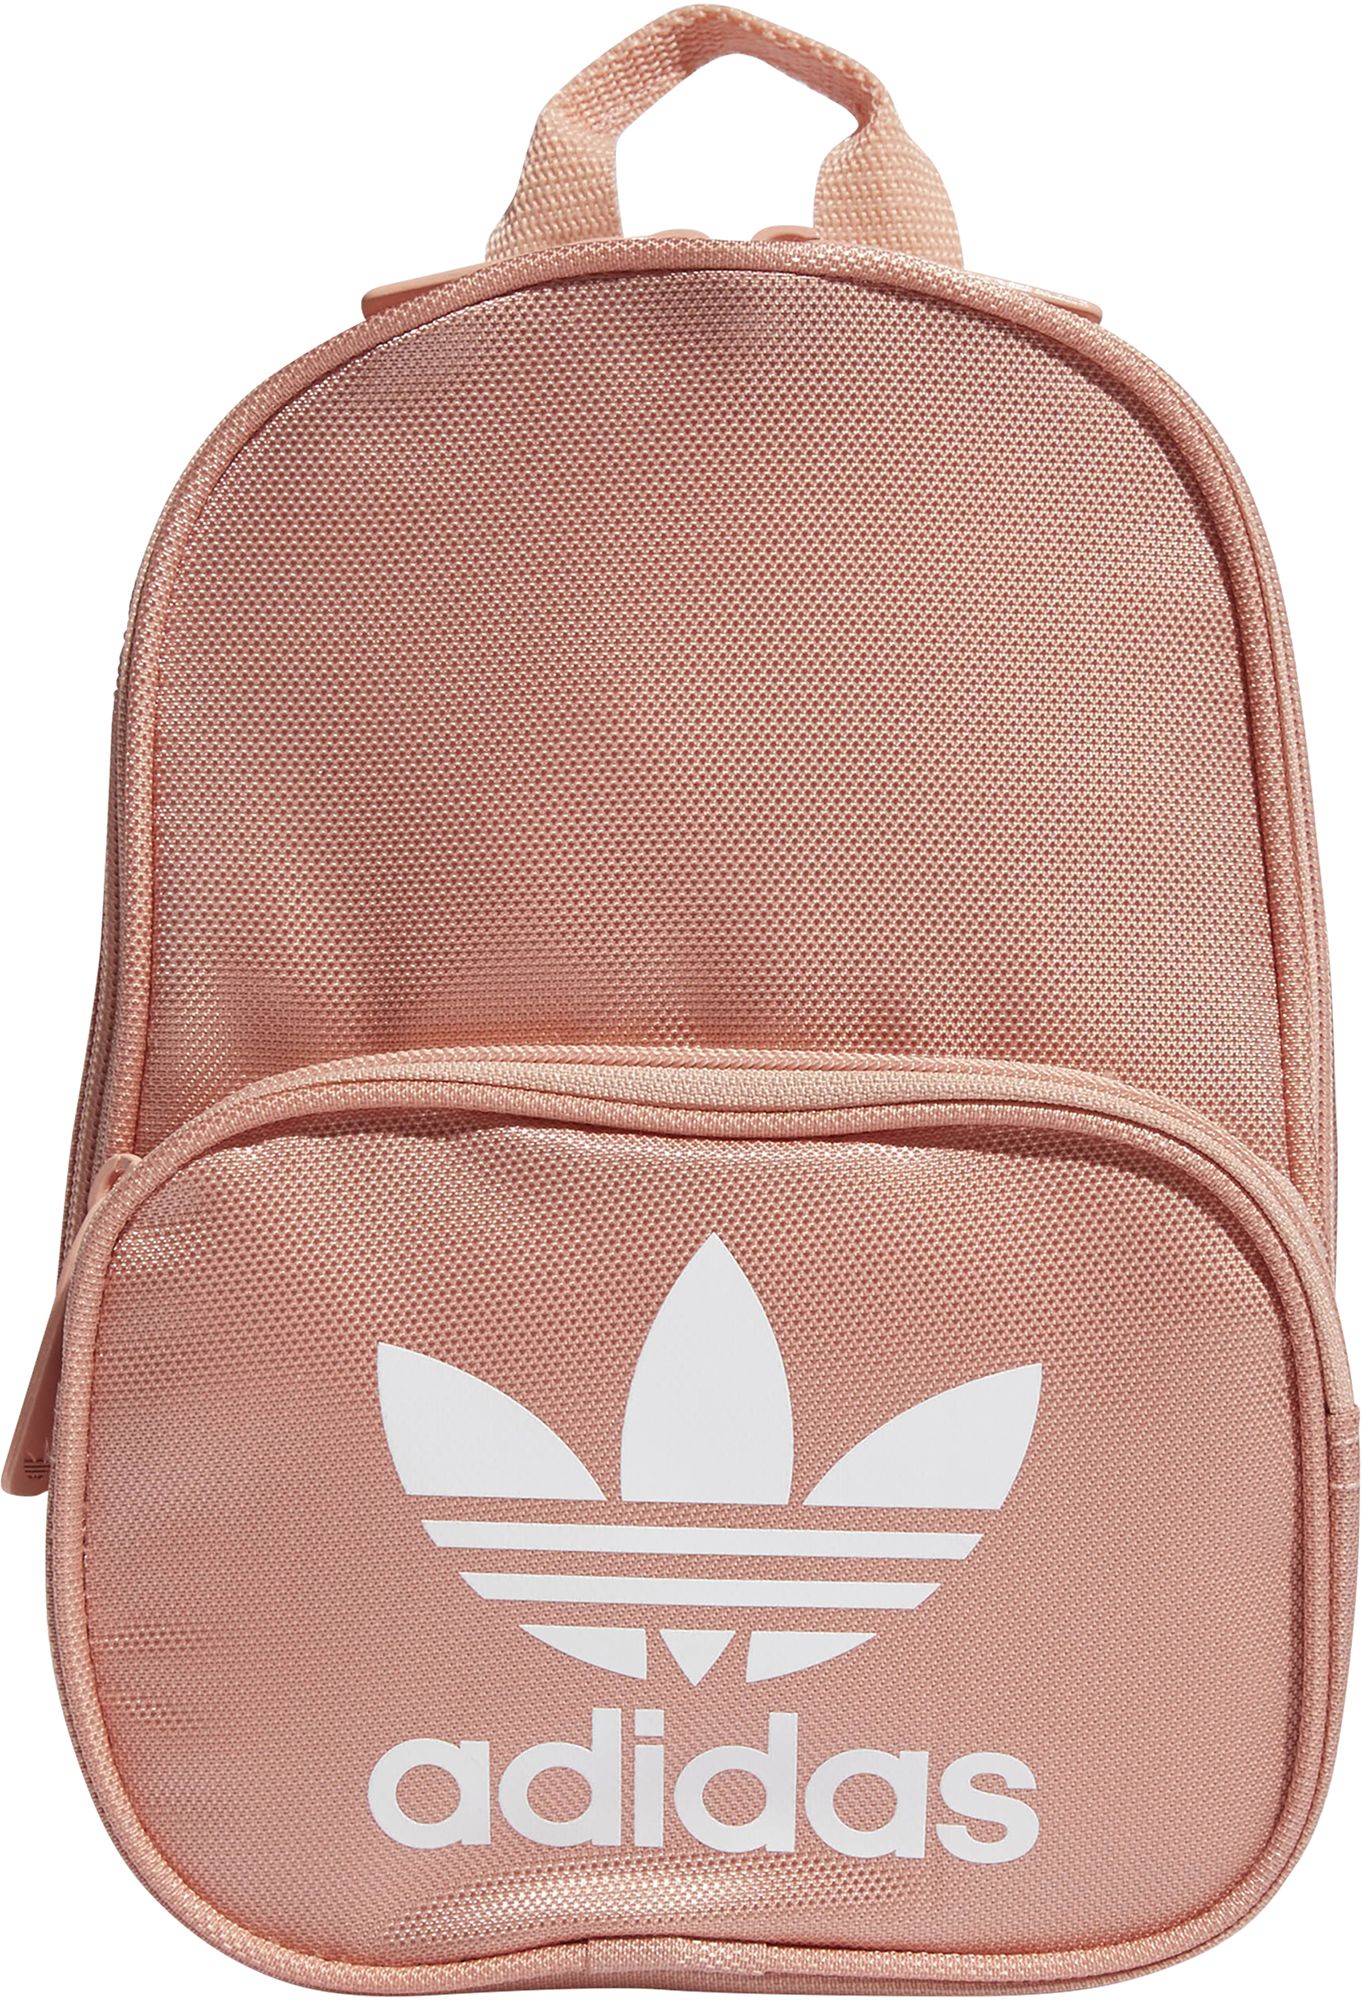 adidas Originals Women's Santiago Mini Backpack, Dust Pink, One Size One Size Dust Pink - image 1 of 7